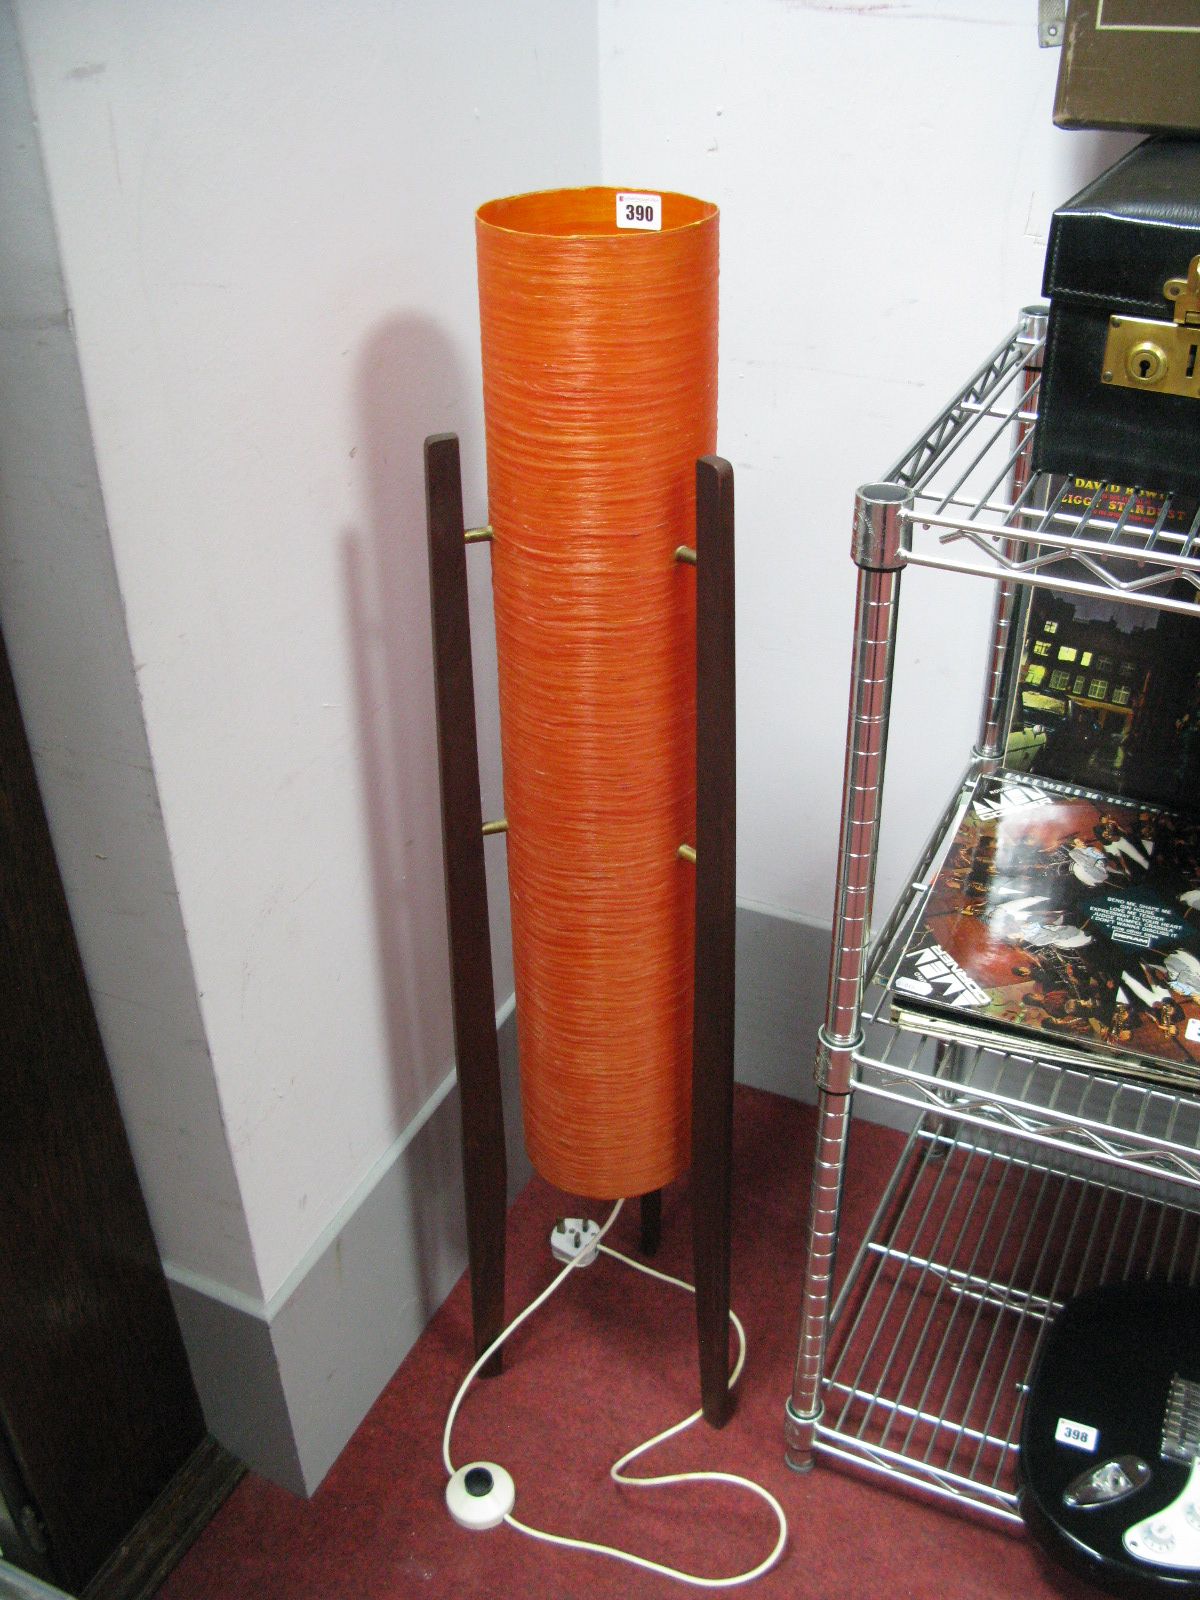 A Circa 1960's "Rocket" Floorstanding Lamp, with orange cylindrical shade.